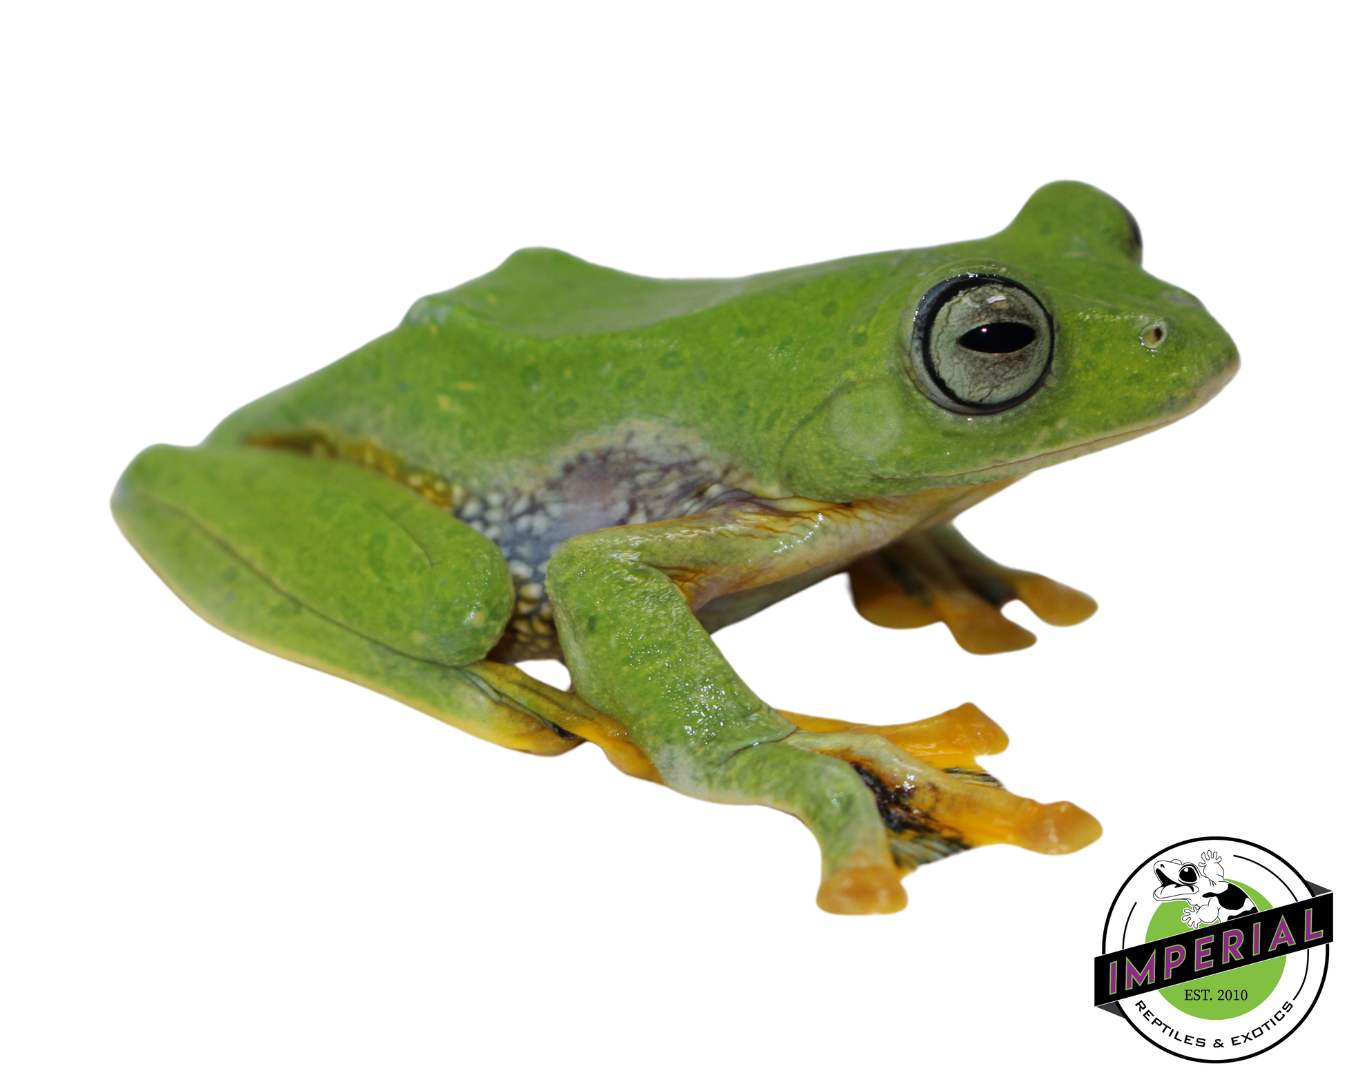 Blue Webbed Gliding Tree Frog for sale, reptiles for sale, buy reptiles online